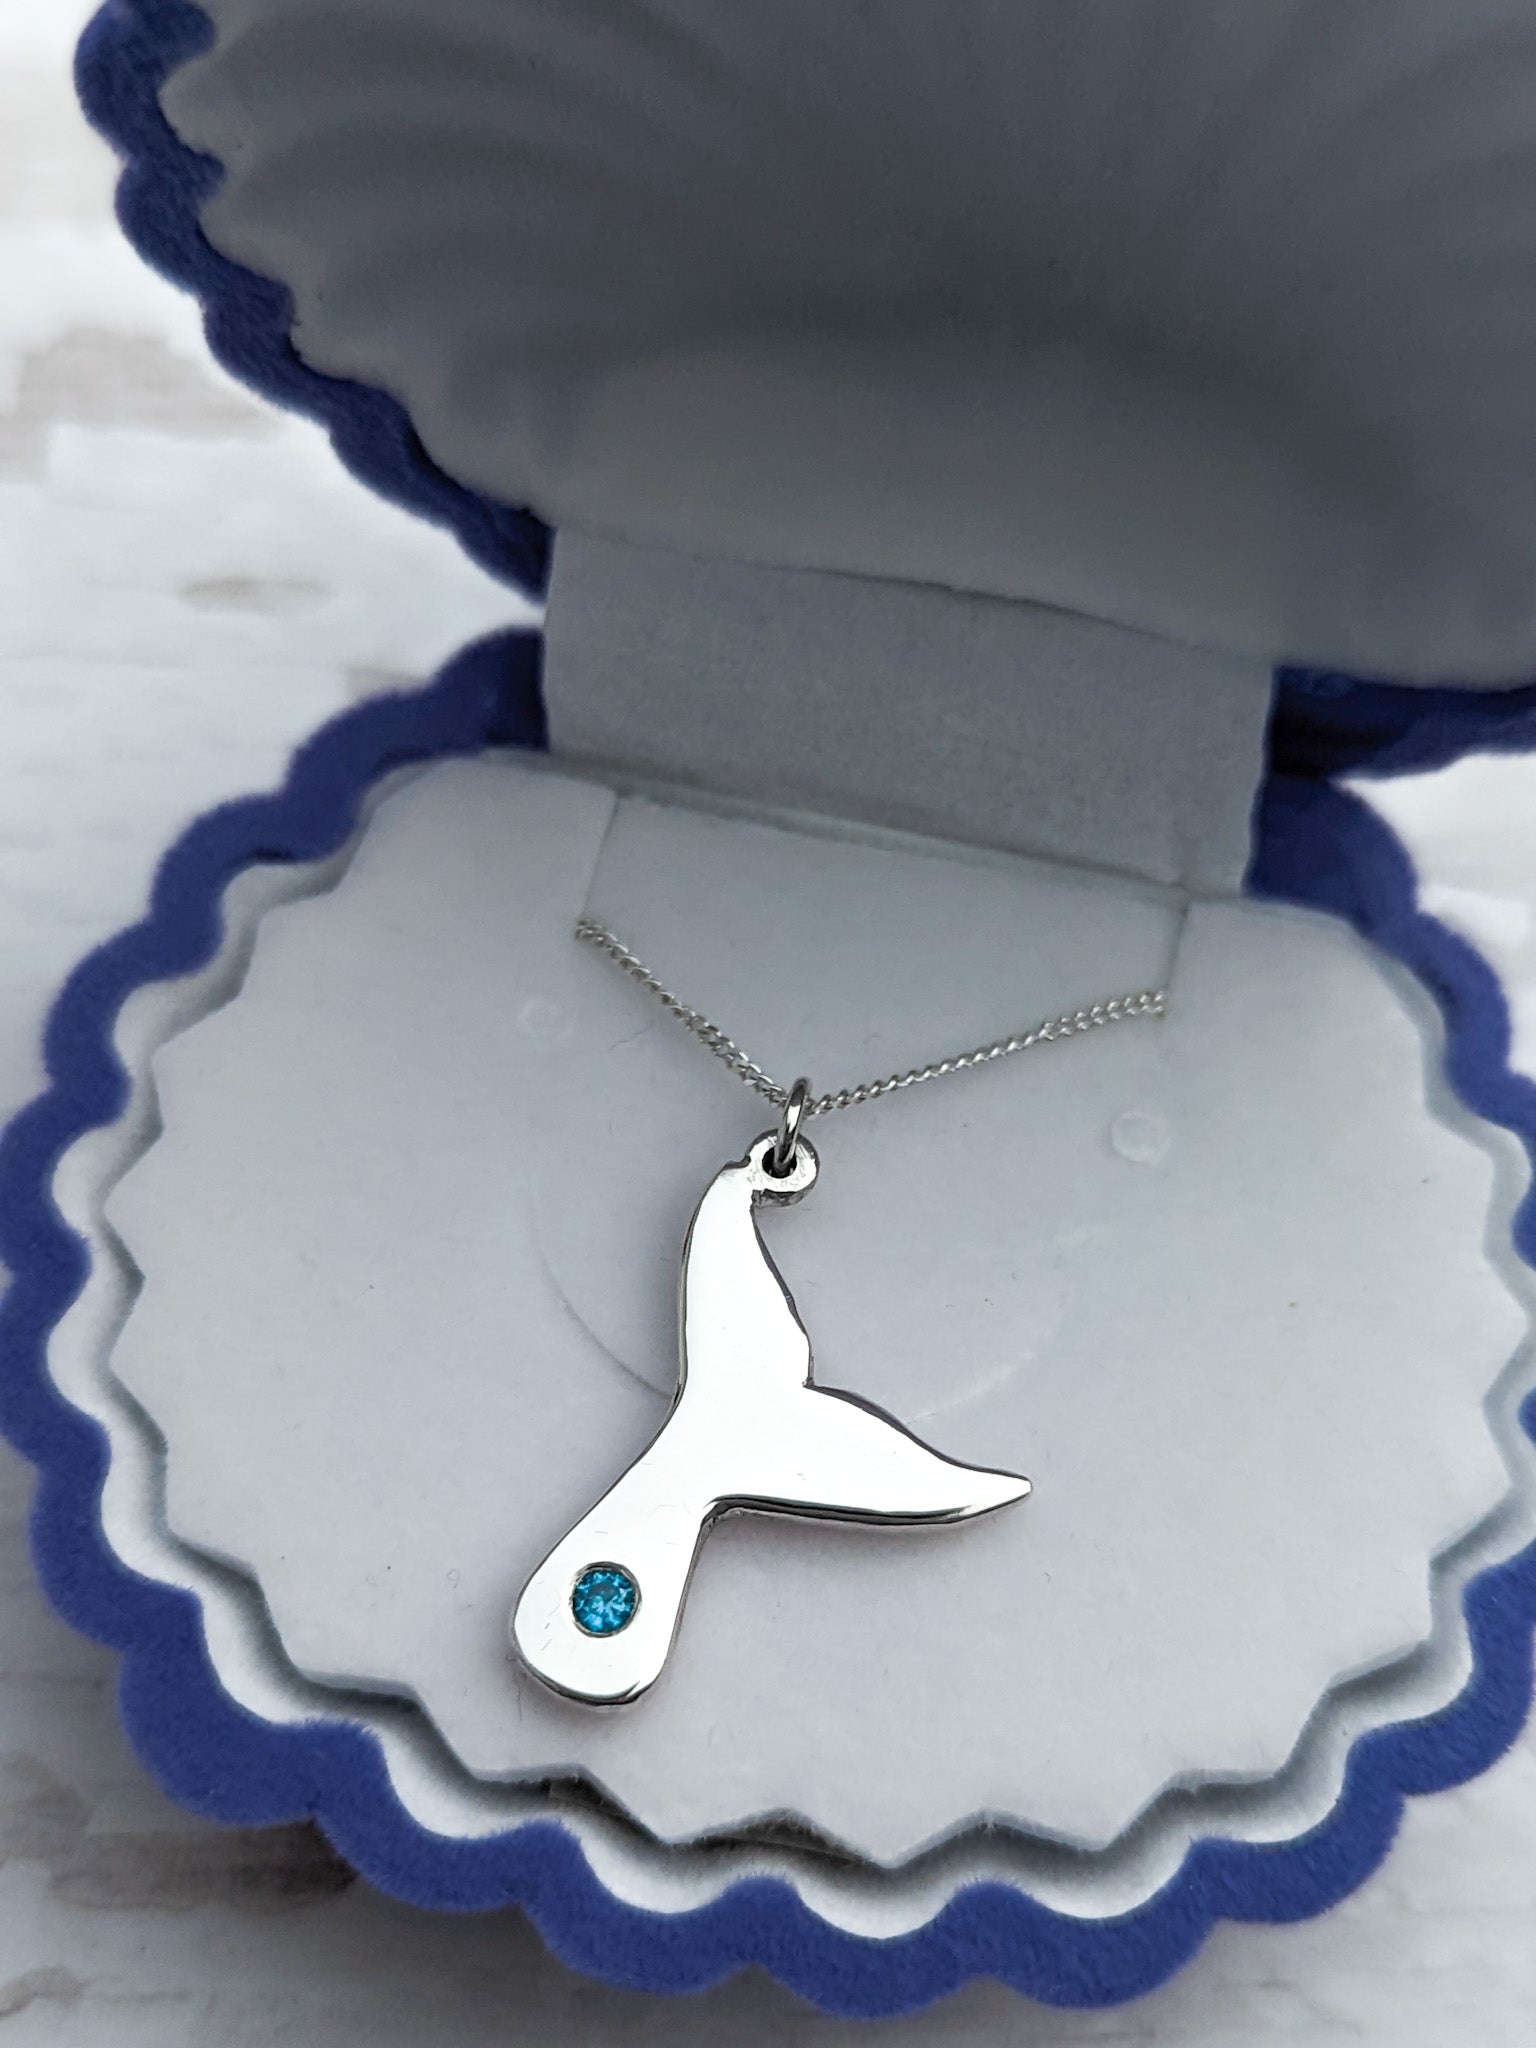 Whale tail necklace with blue flush set stone